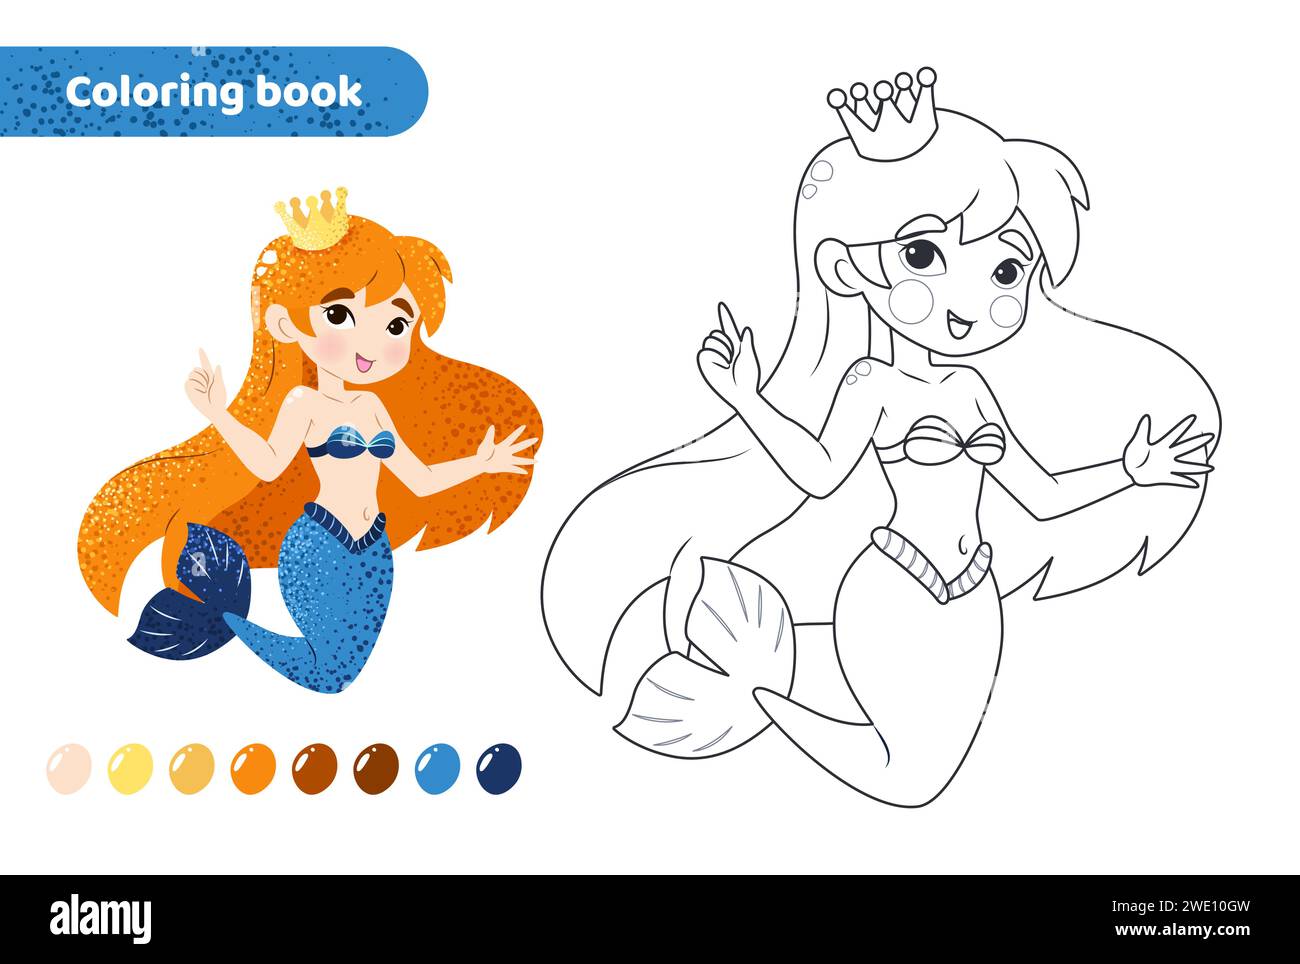 Coloring book for kids. Cute mermaid with crown. Stock Vector